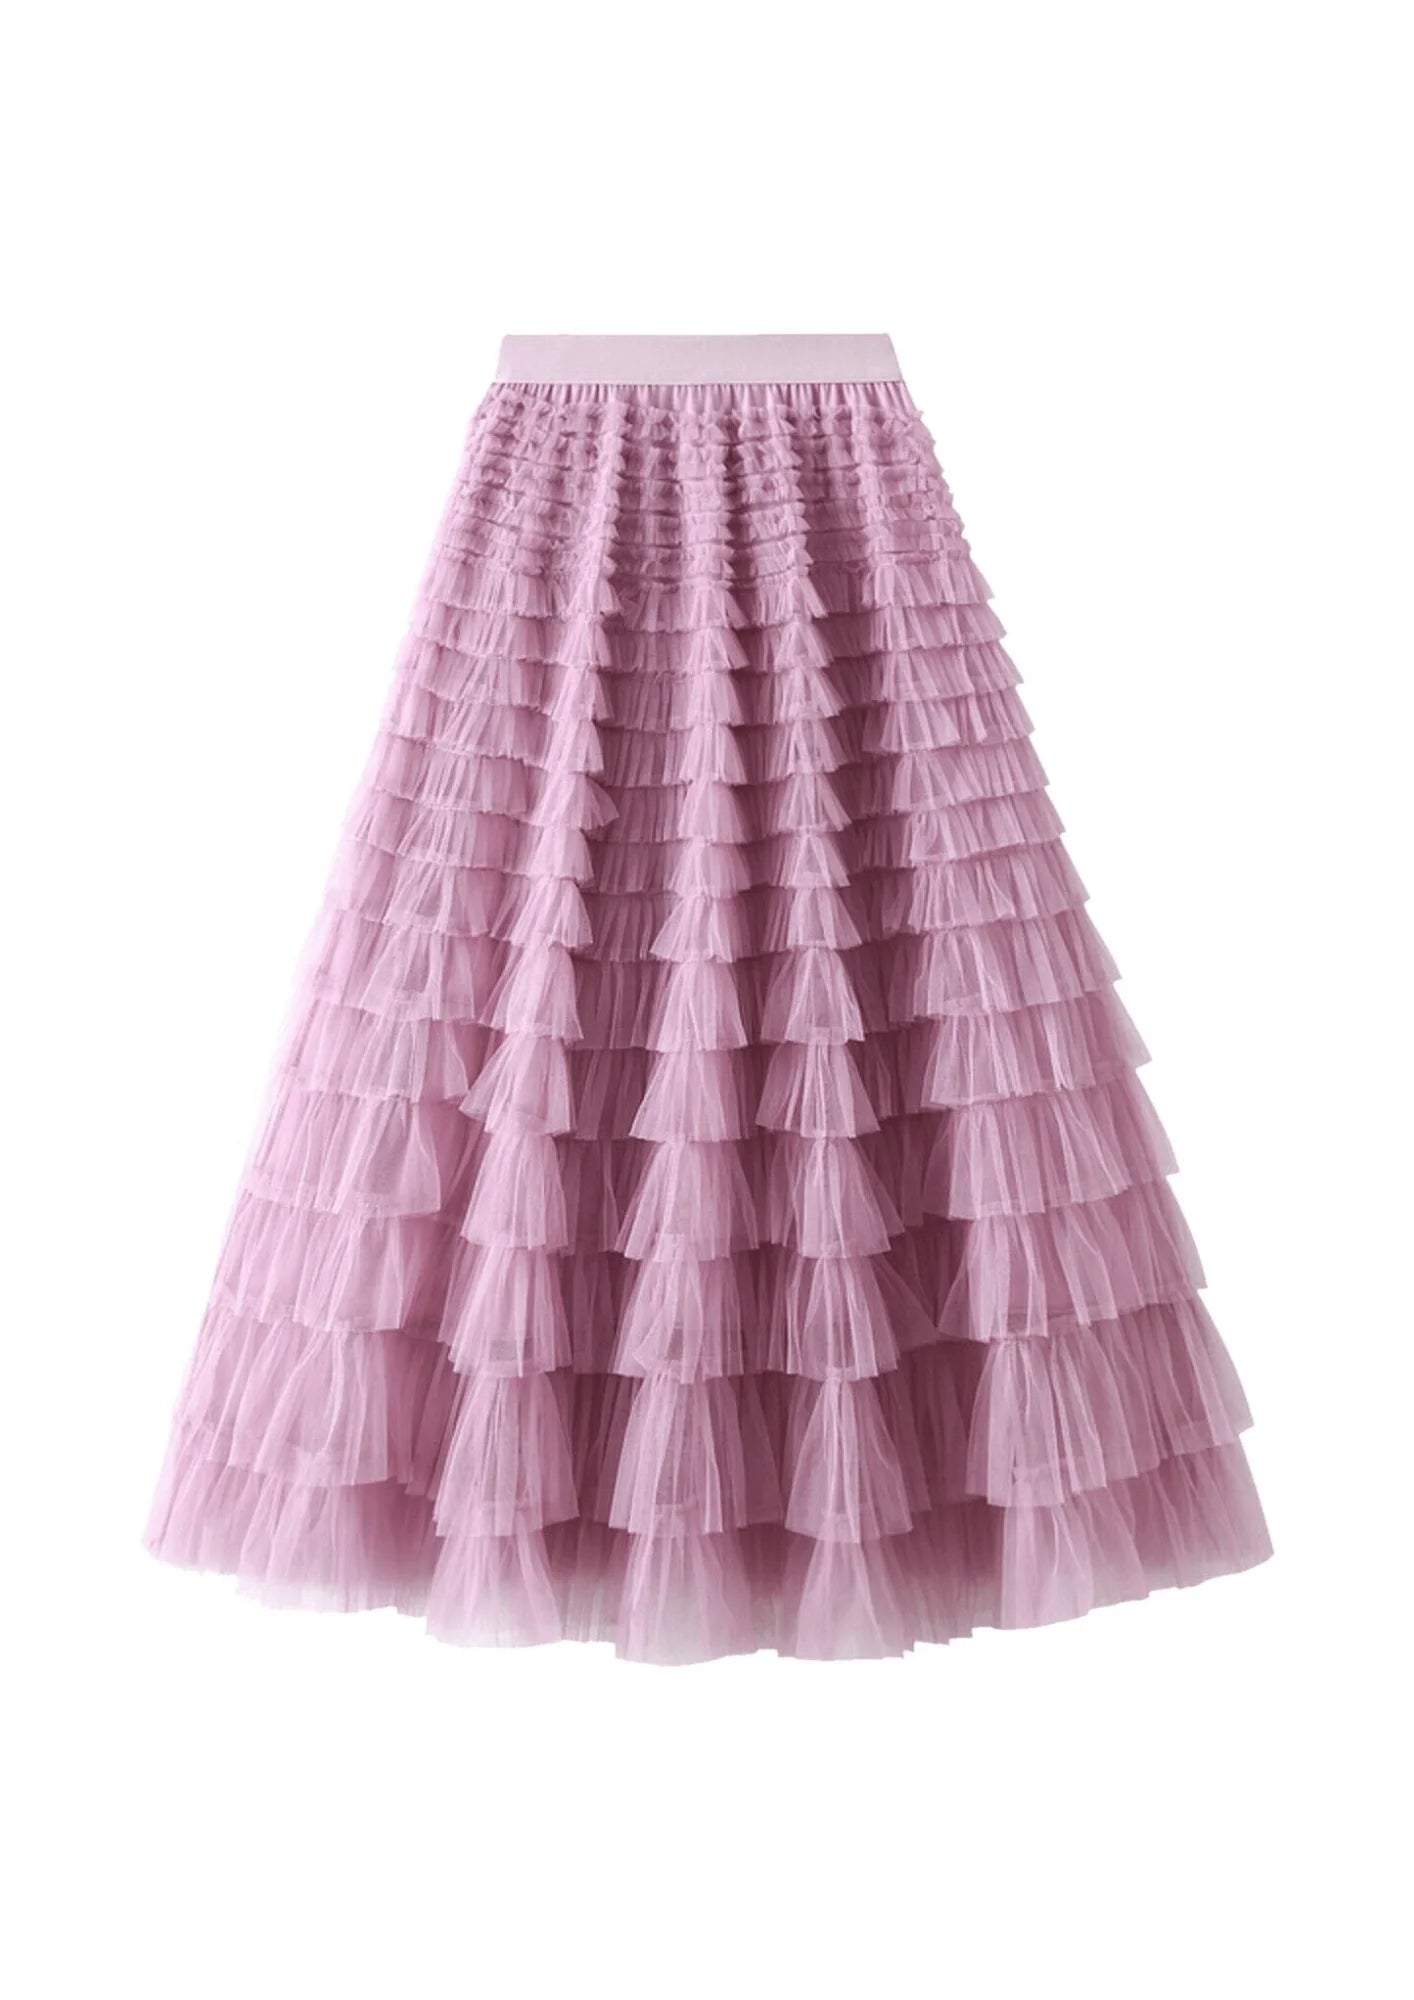 Jupe Rosa Tulle